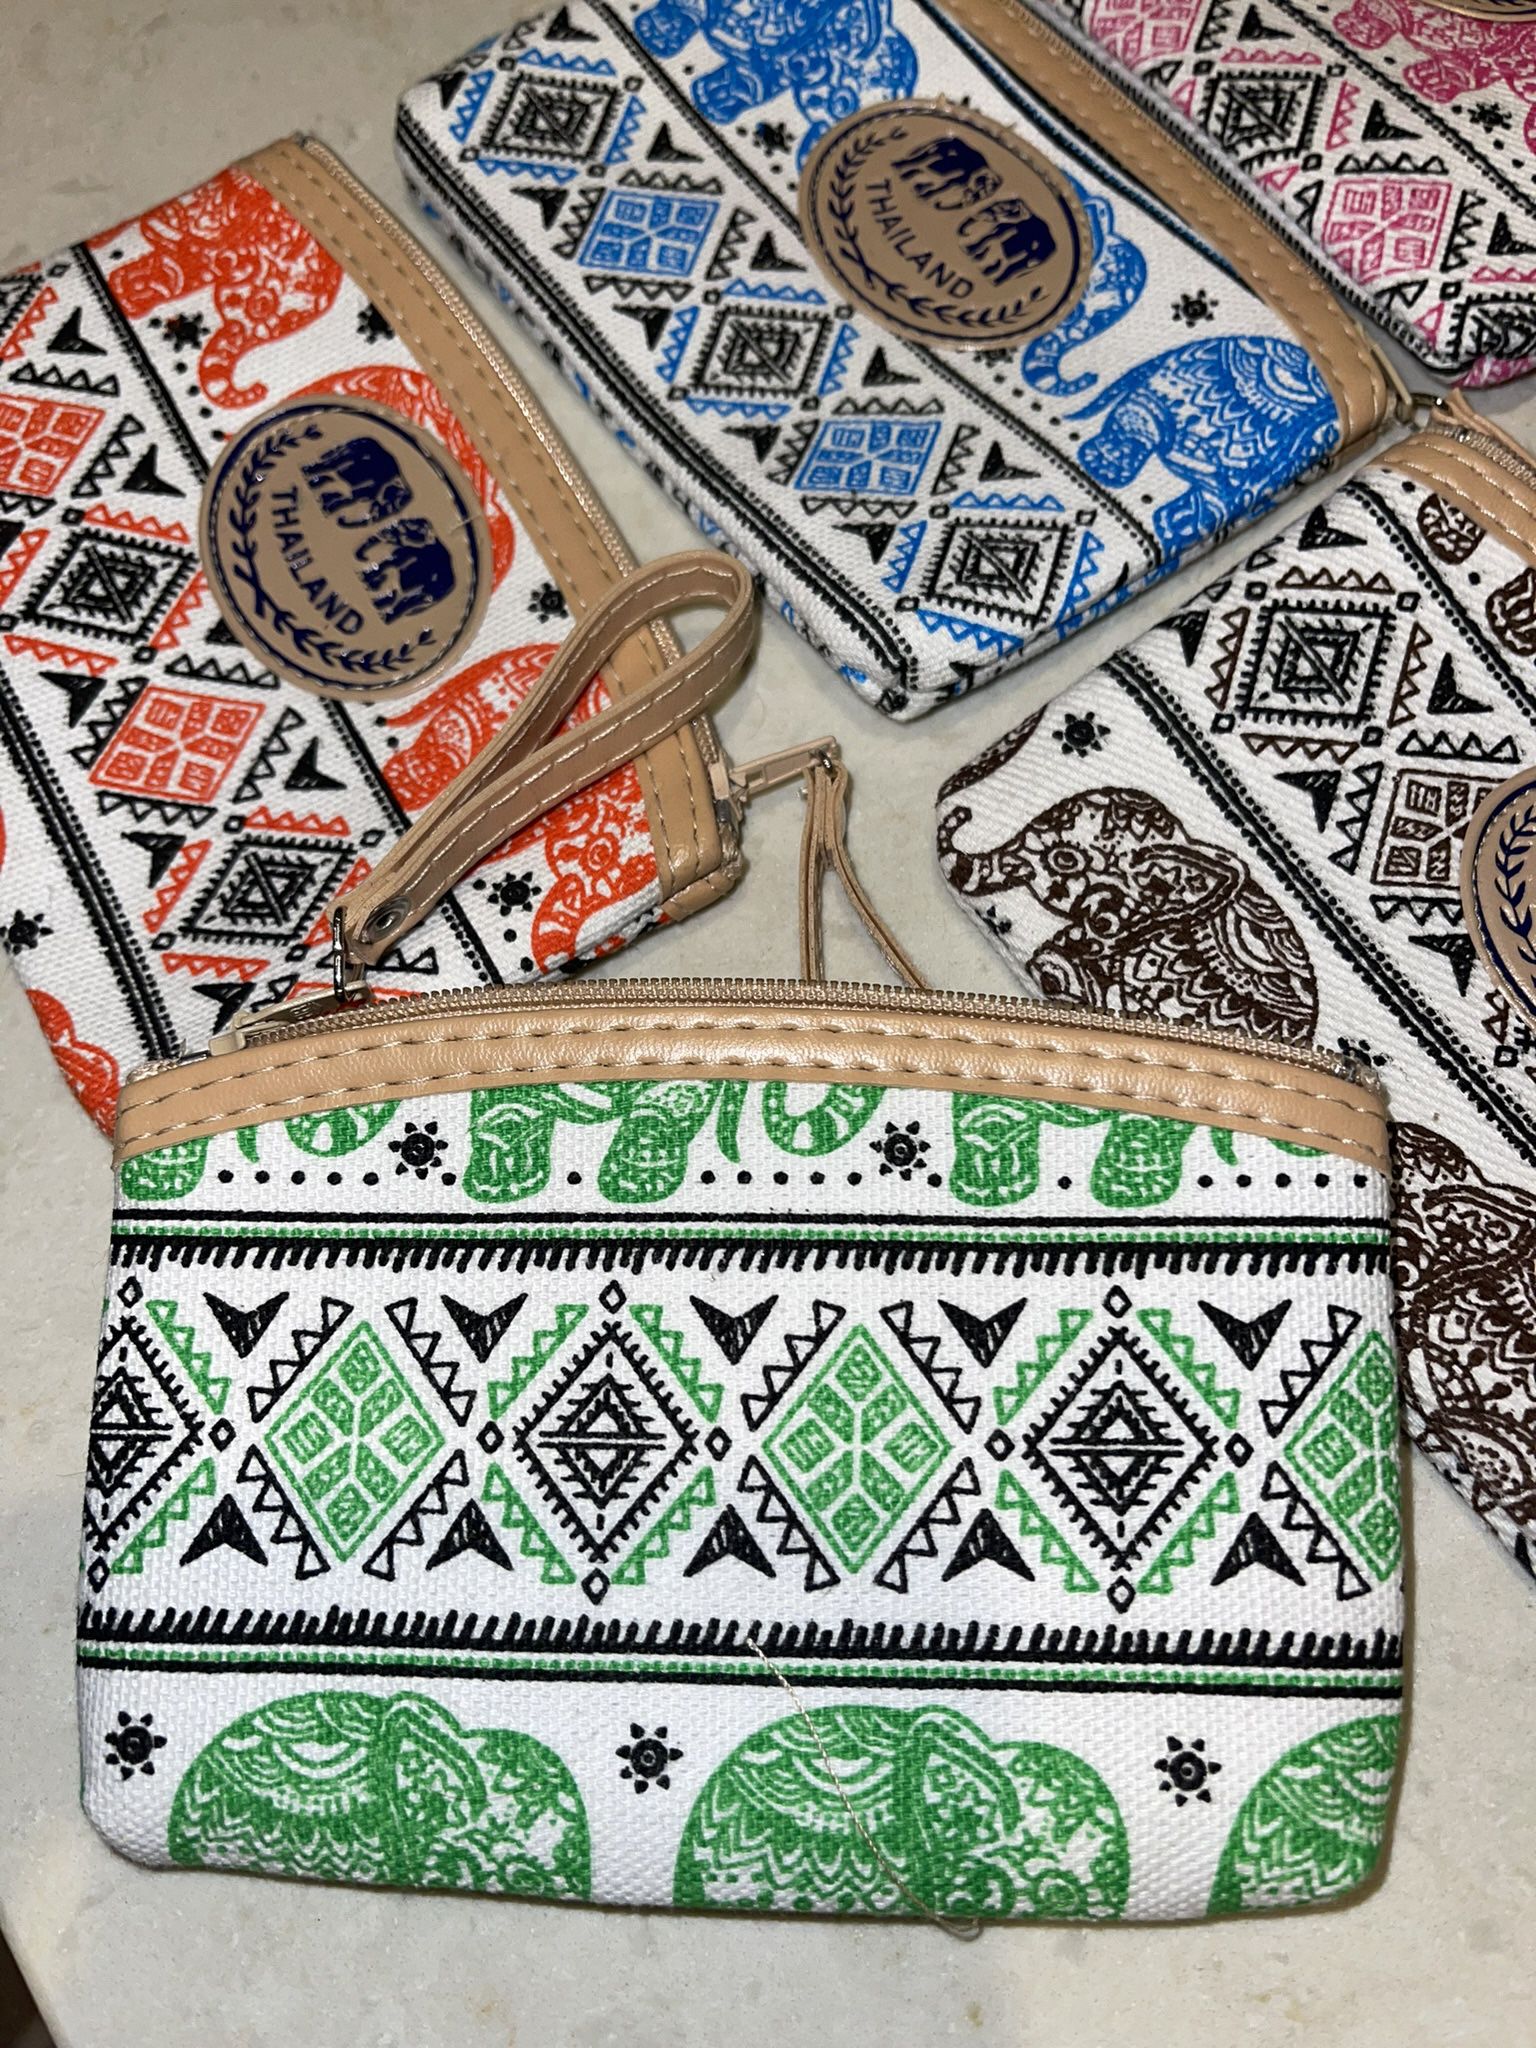 Thai Tapestry Hangers for Sale in San Diego, CA - OfferUp